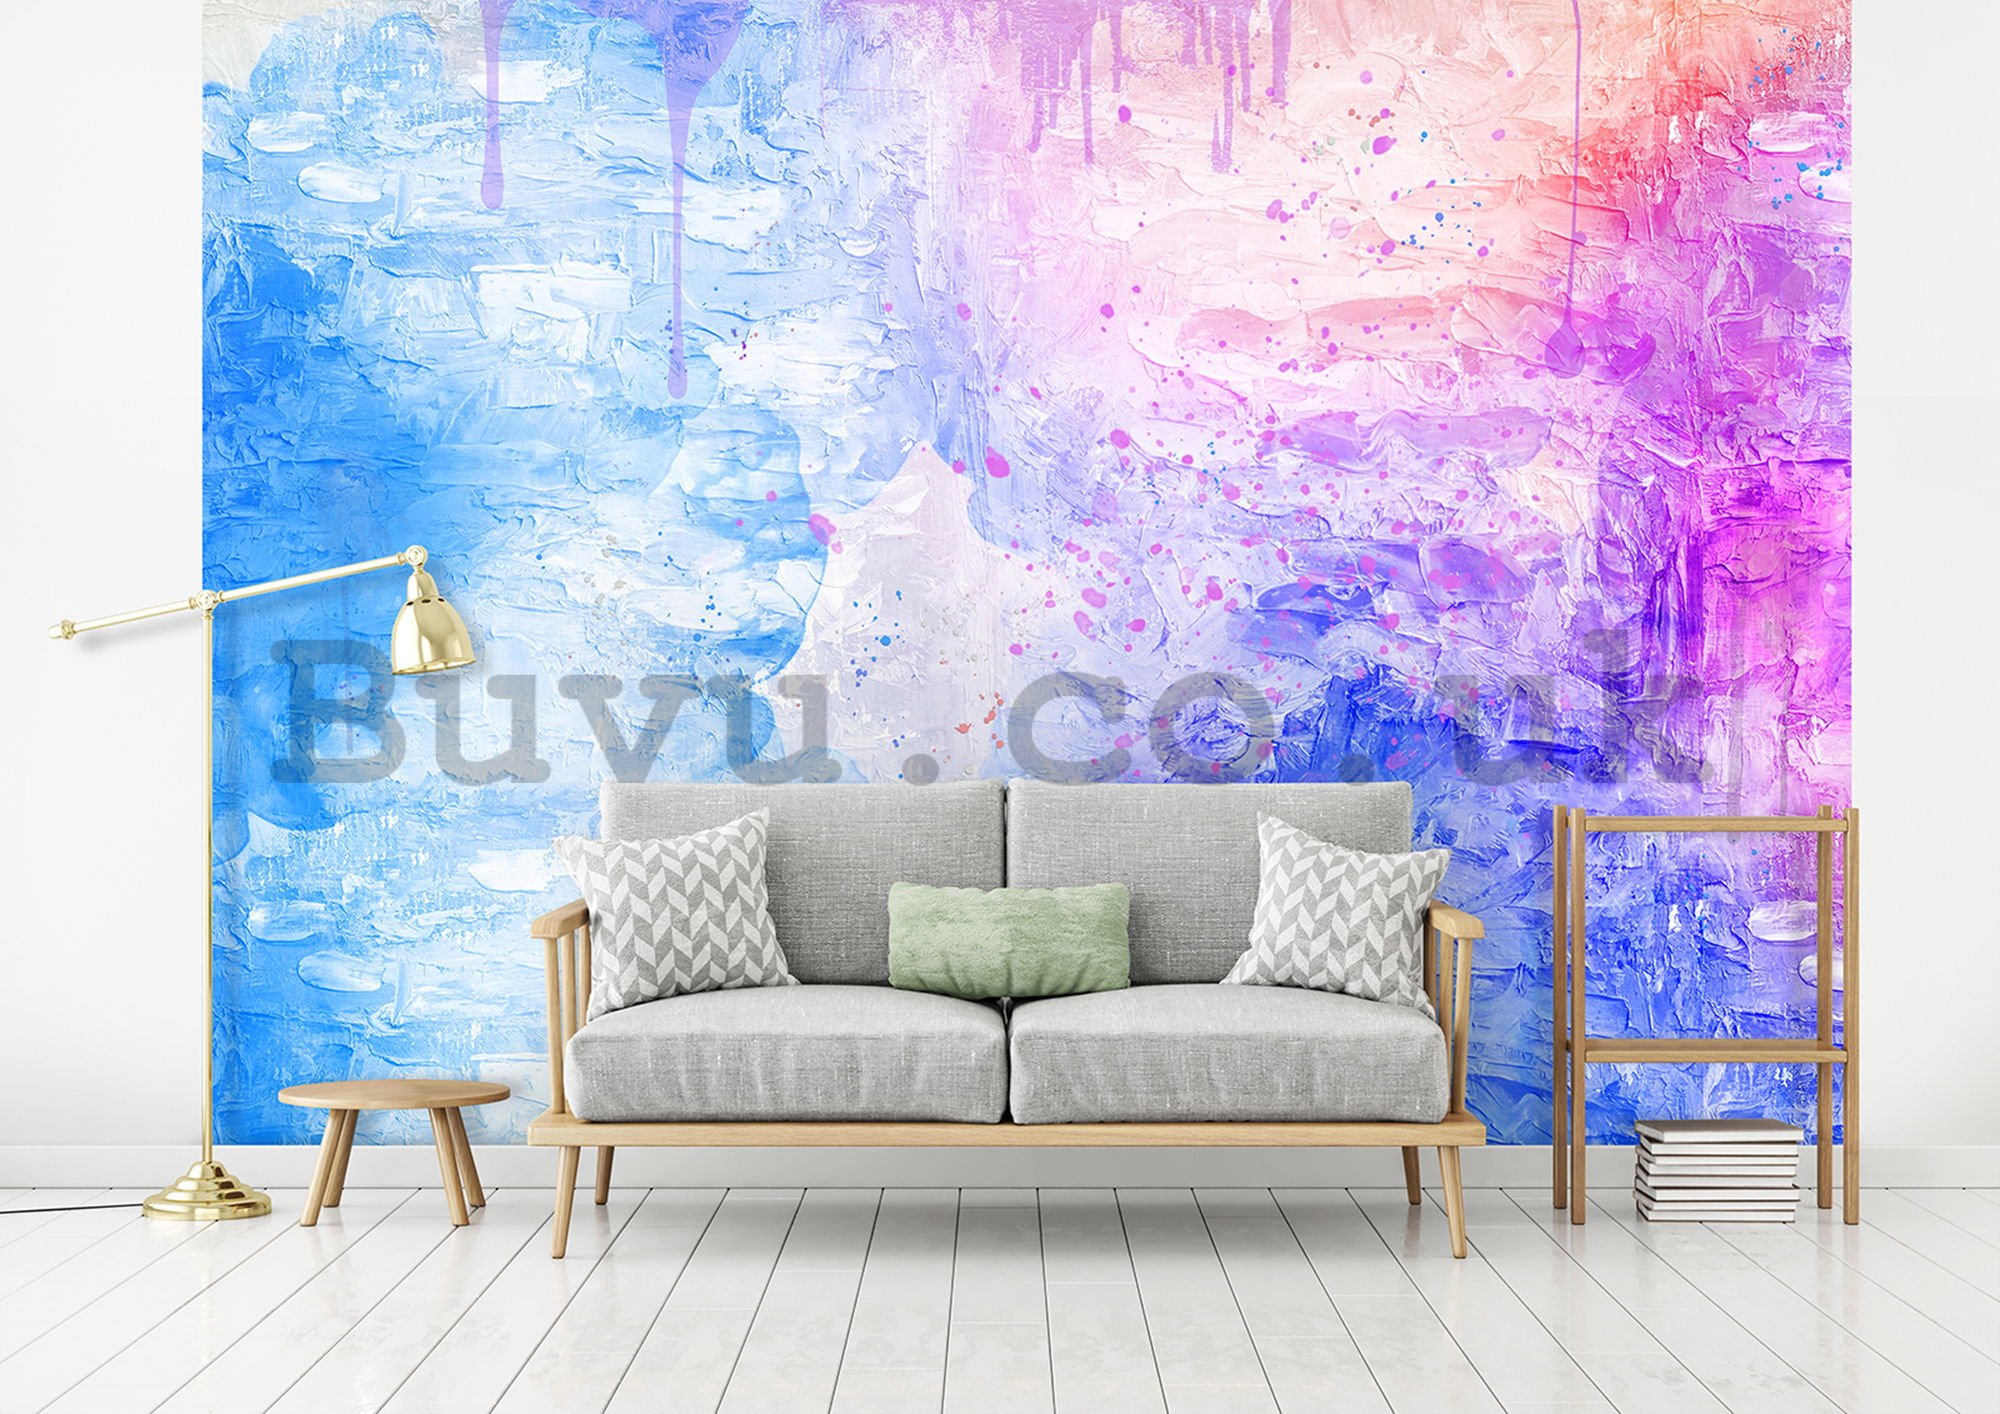 Wall mural: Colorful (2) - 184x254 cm